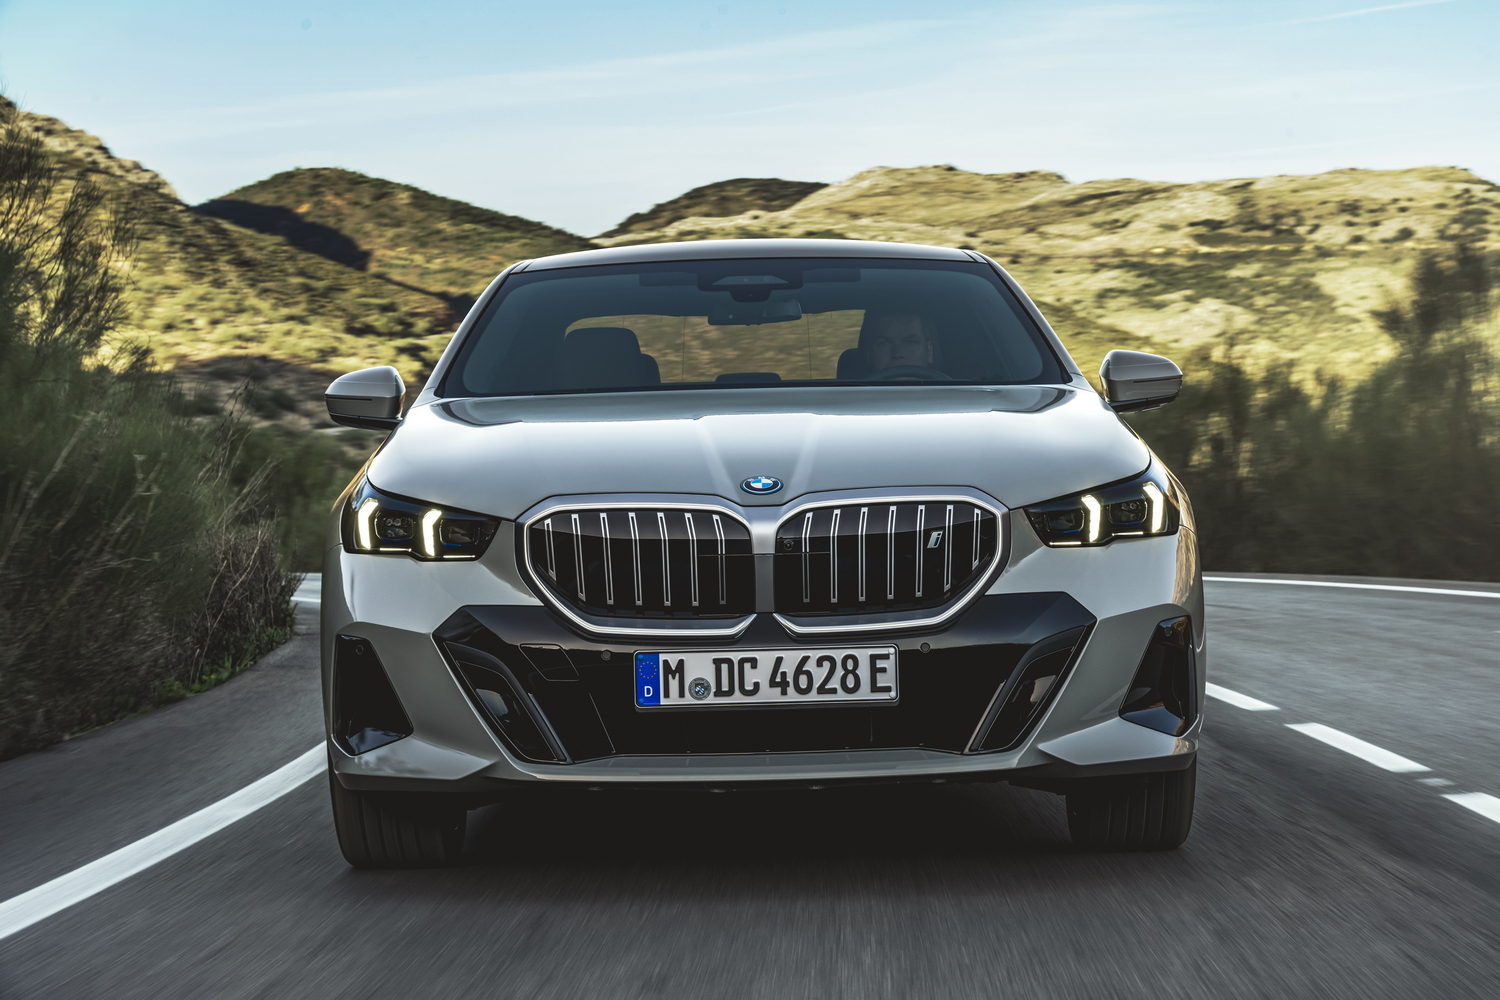 BMW i5 is new electric 5 Series